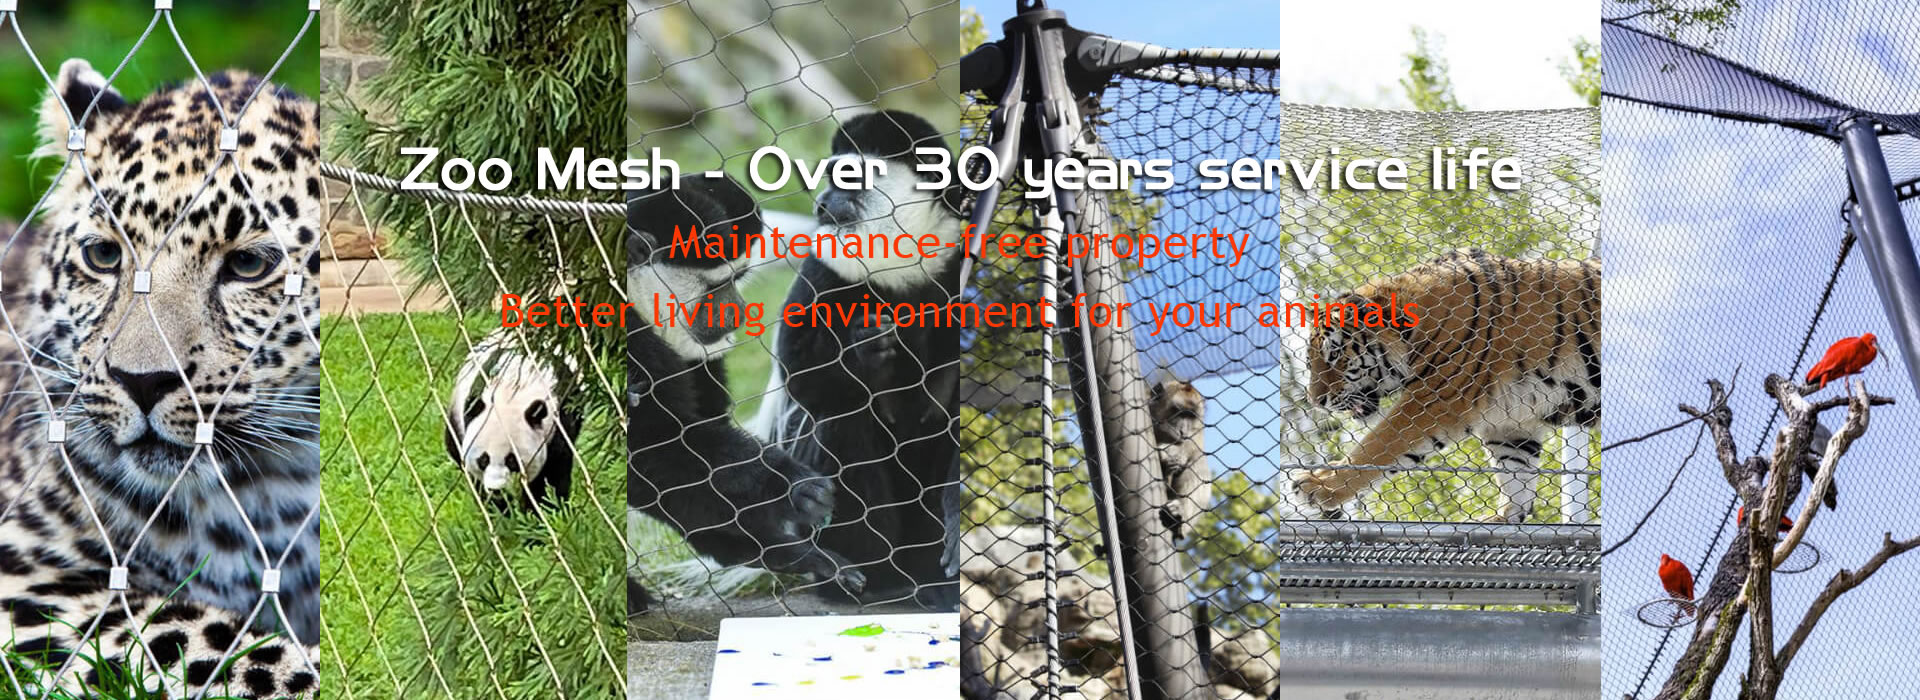 zoo mesh over 30 years service life